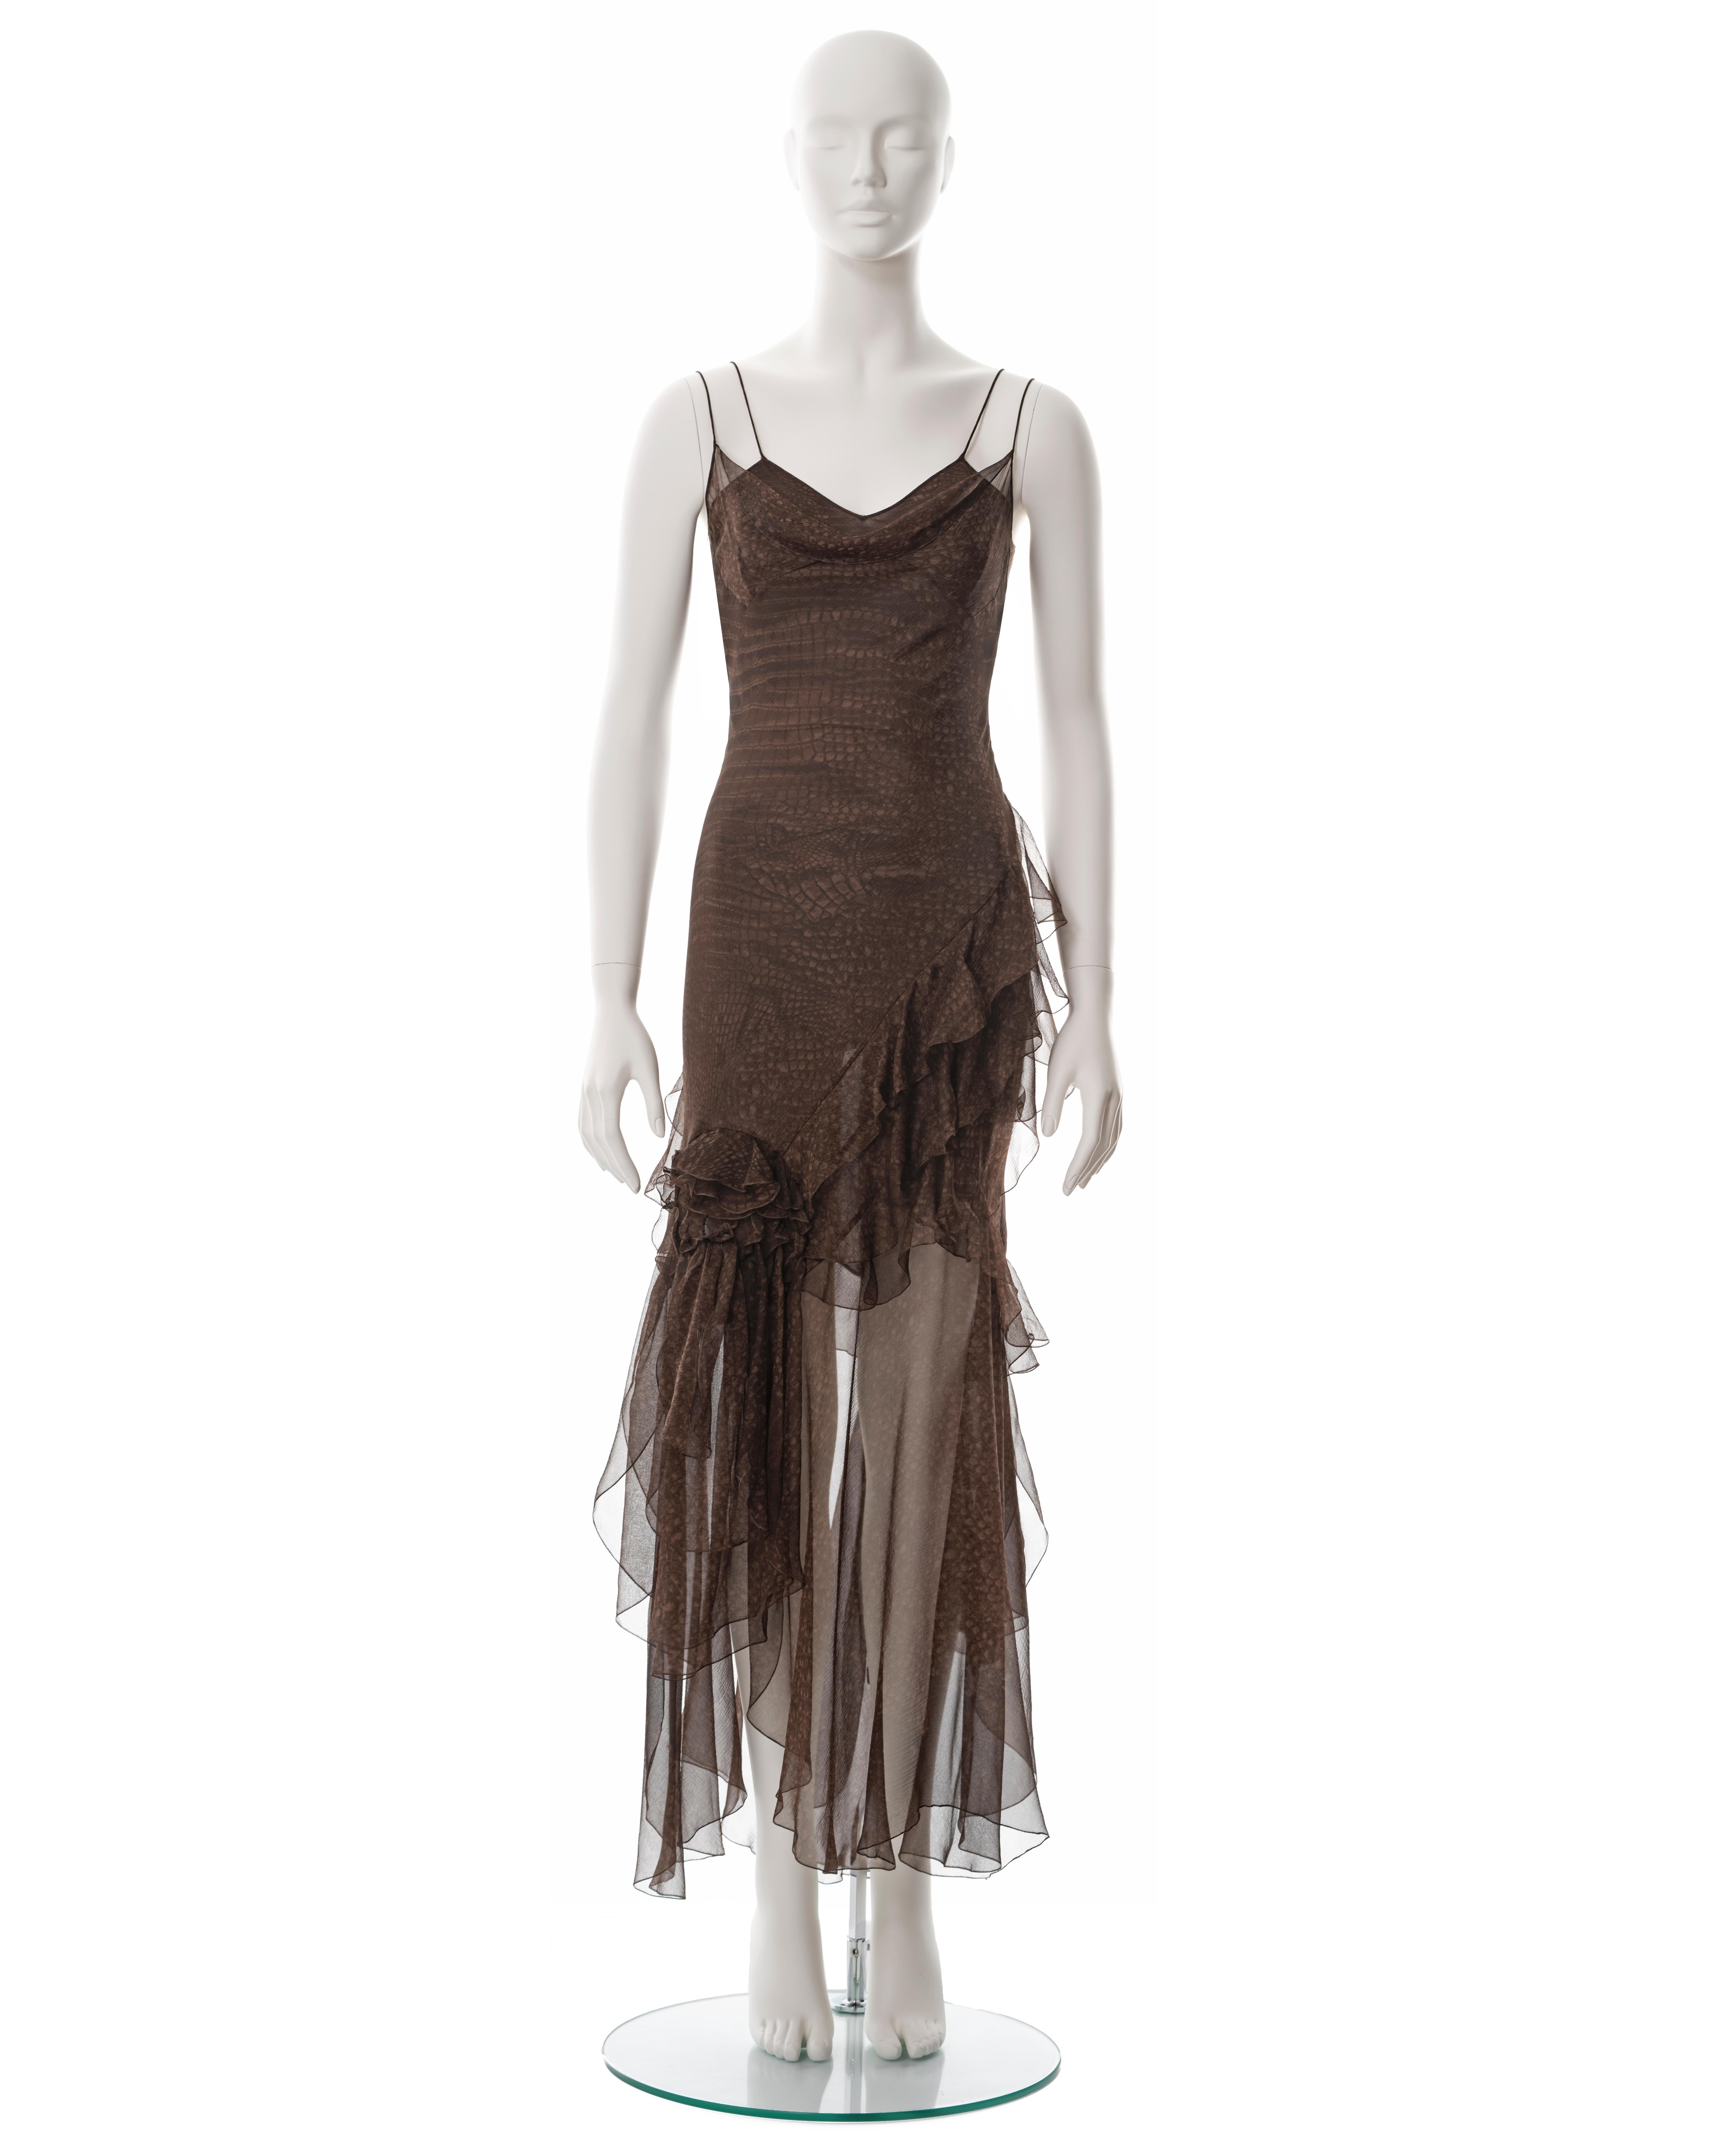 ▪ John Galliano brown bias-cut silk chiffon evening dress
▪ Fall-Winter 2000
▪ Sold by One of a Kind Archive
▪ Reptile-skin print 
▪ Cowl neckline
▪ Double layered
▪ Asymmetric skirt 
▪ Chiffon frill trim 
▪ 2 rose corsages 
▪ FR 36 - UK 8 - IT 40
▪